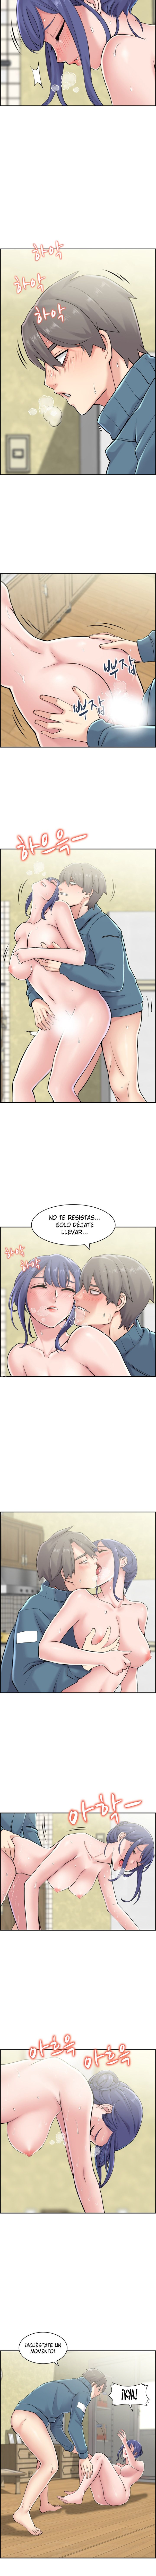 Sister in Law Manhwa Raw - Chapter 21 Page 3